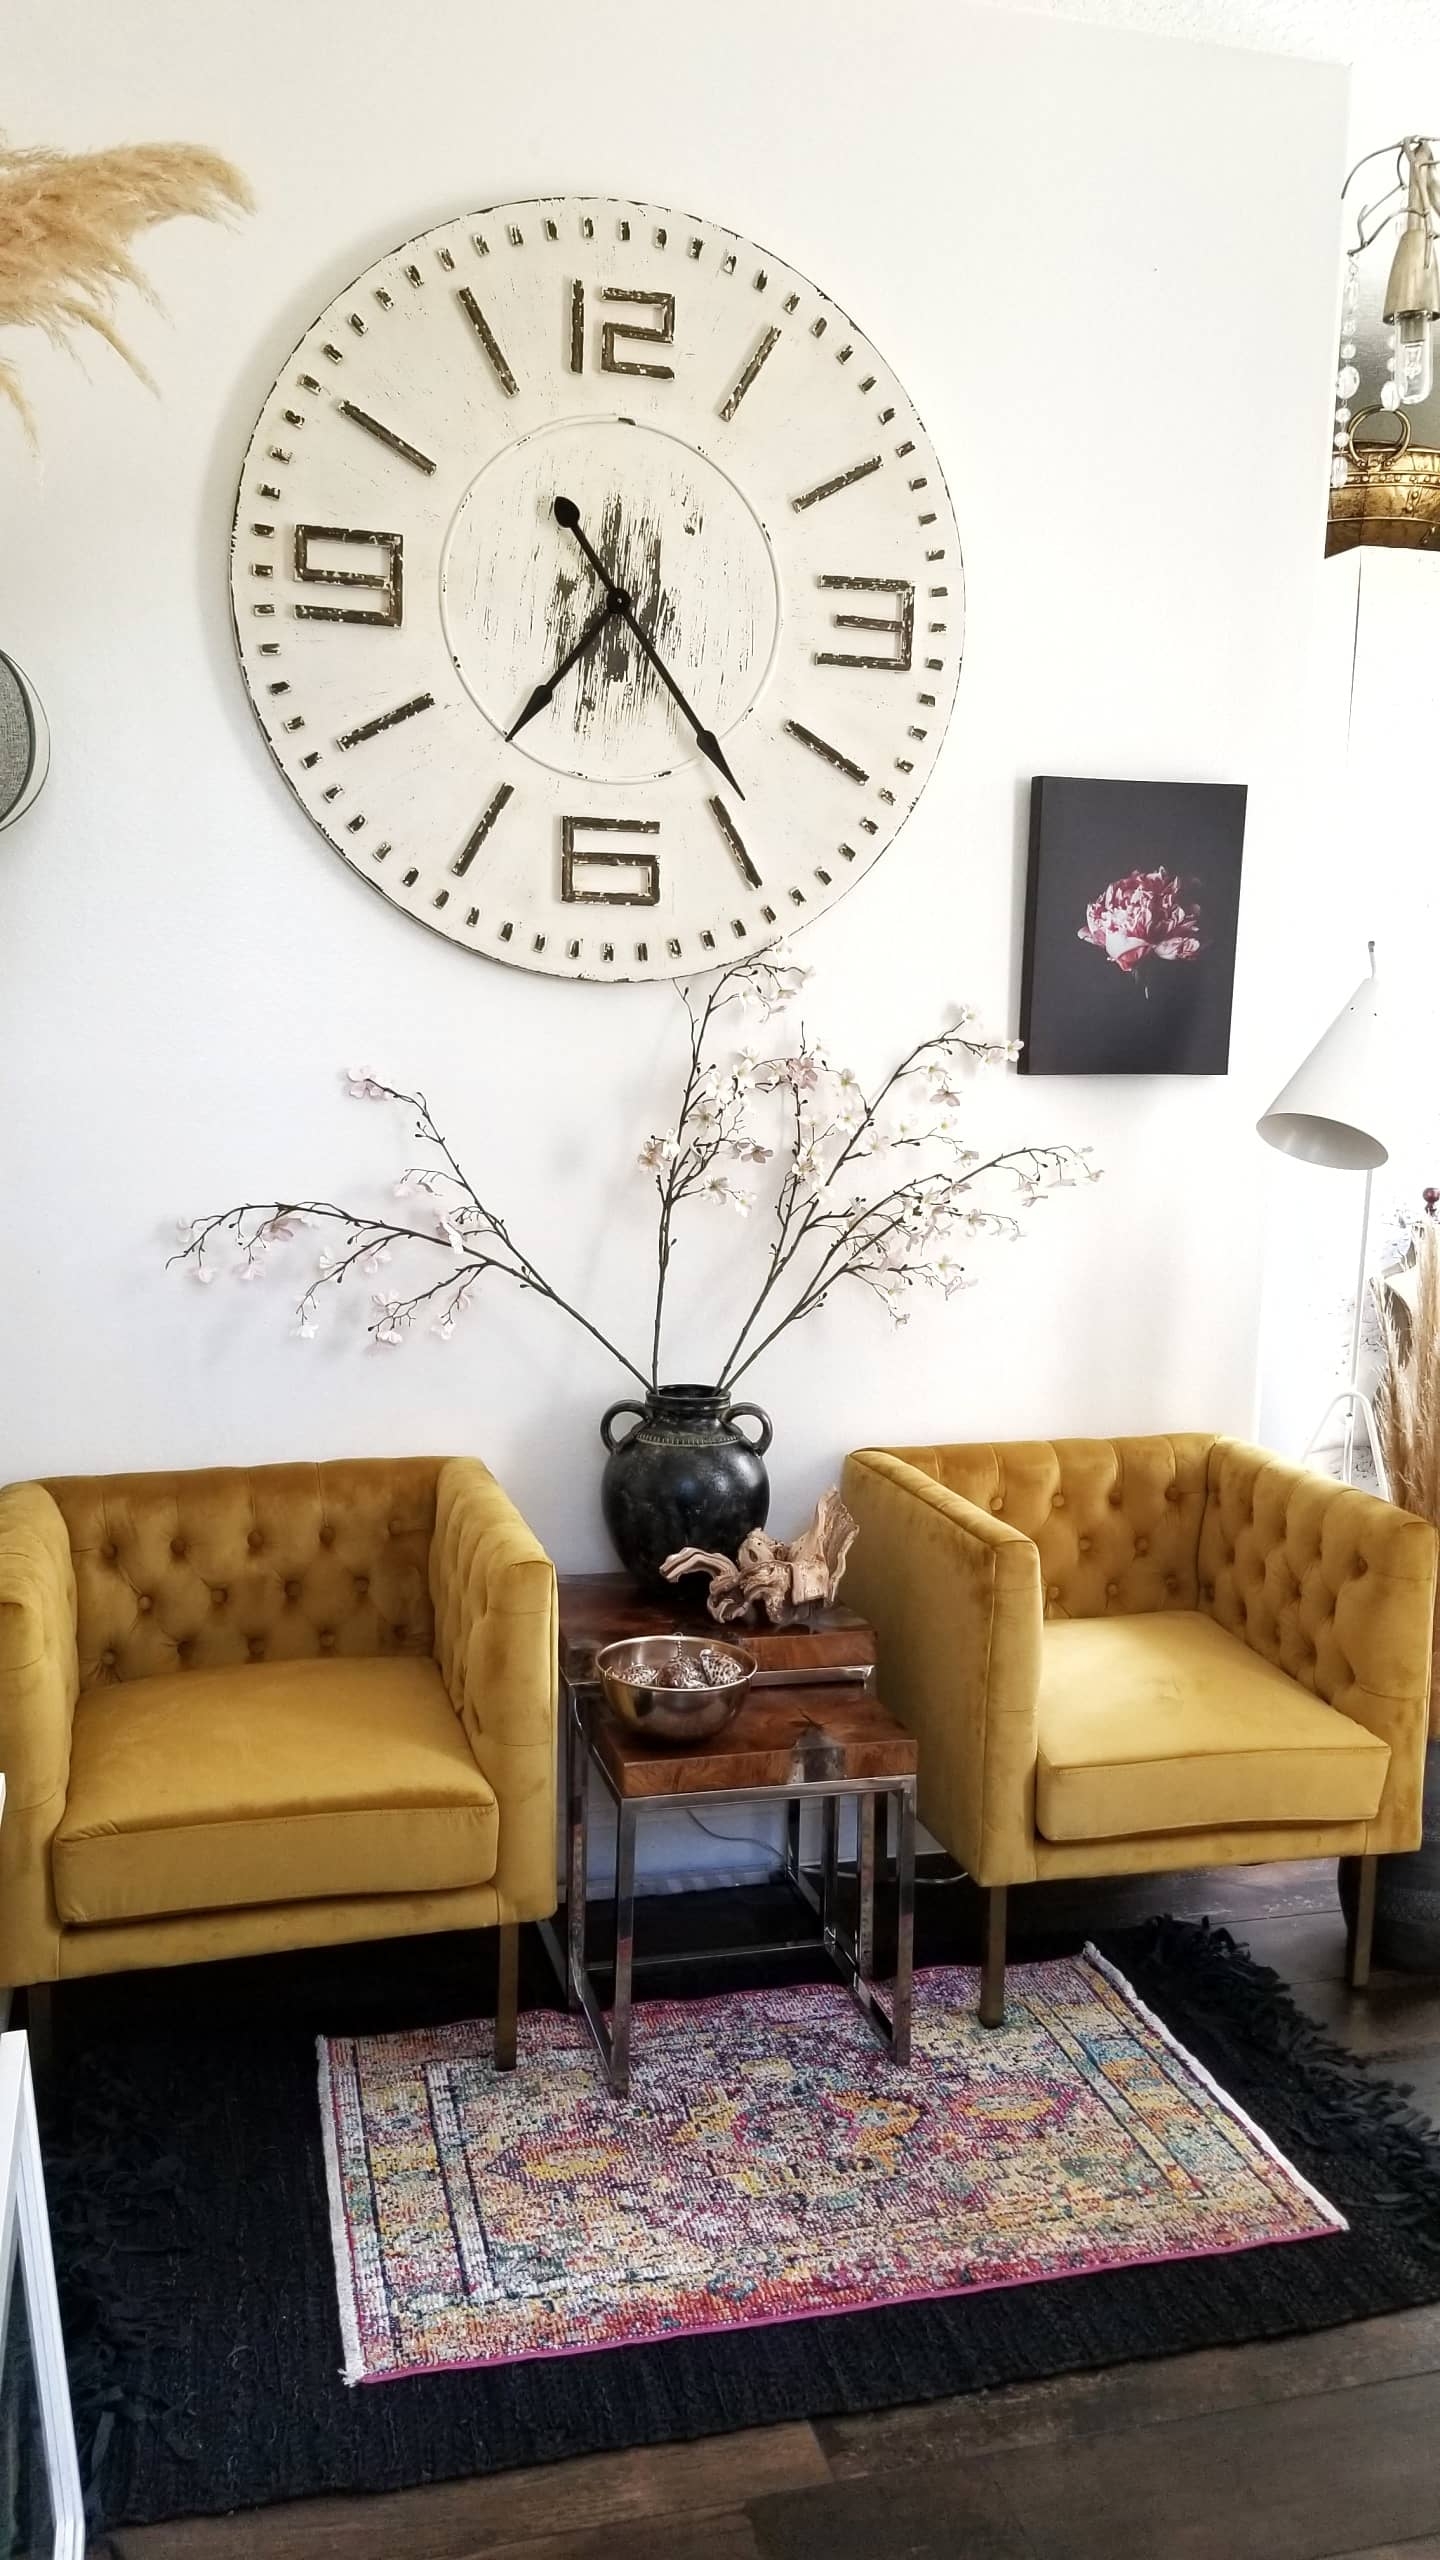 Mid Century Modern Urban Industrial Chic She Den Office She Shed Lound Velvet Chairs White Tulip Table Egg Chairs Black and White Decor Modern Glam Interior Decorating Ideas Wood Tile Floor Art New York Loft Mirror Wall art